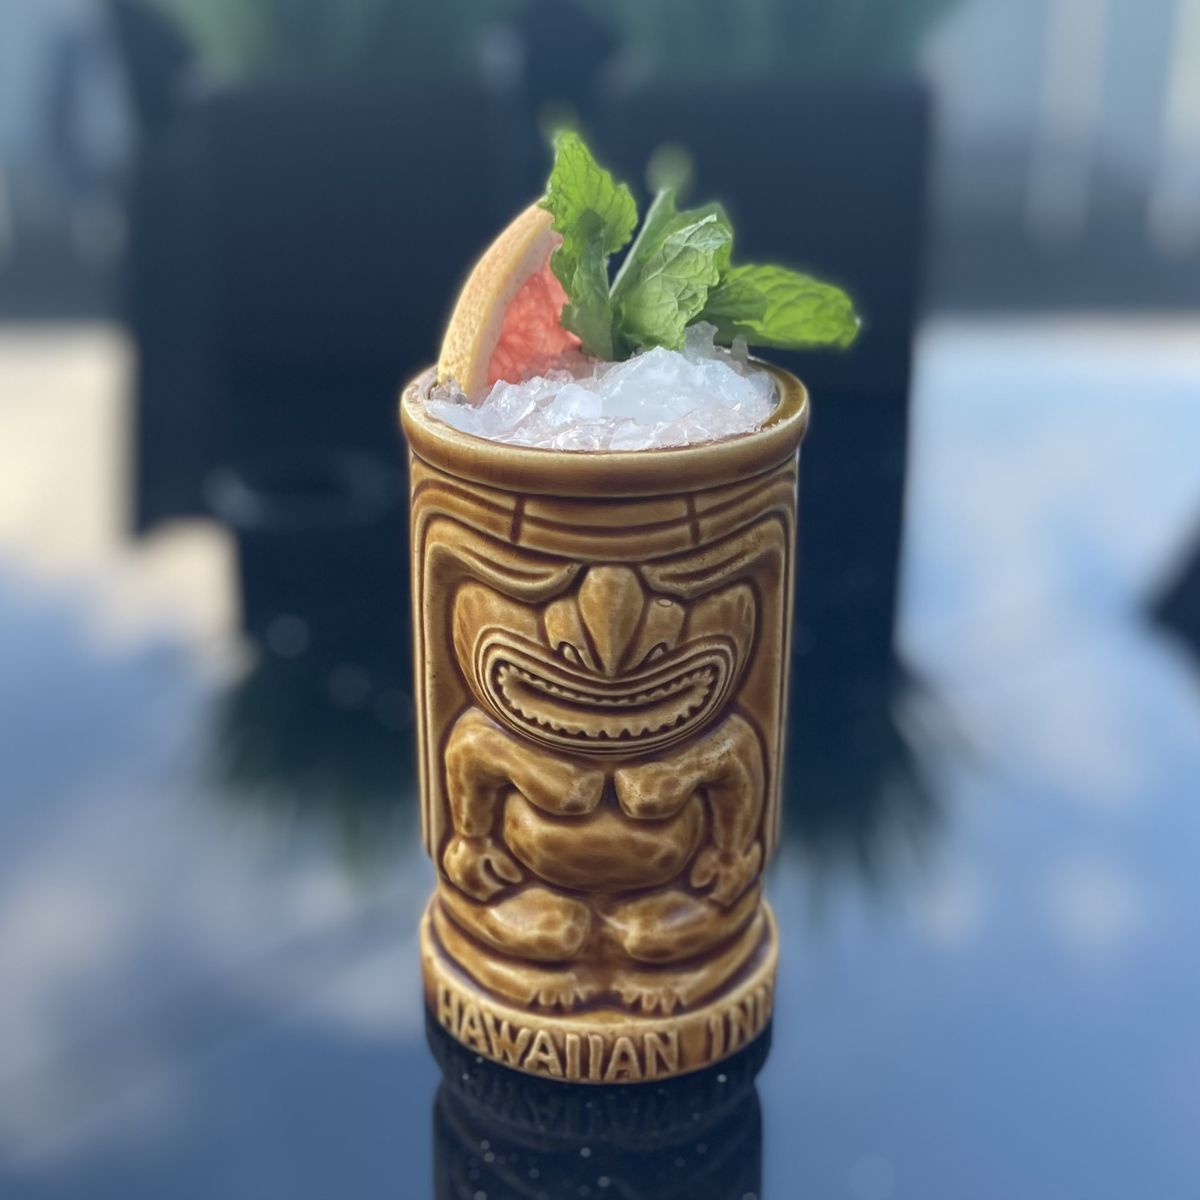 A tasty weekend sipper featuring two great rums from two great islands.

Recommended brands:
•Havana Club 7 Años
•Newfoundland Distillery Co. gunpowder & rose rum

CC626S—Admiral’s Mix

•2.5 oz. hibiscus liqueur
•1.5 oz. orgeat
•1 oz. Grand Marnier
•1 oz. Pernod
•0.75 oz. vanilla syrup
•0.5 oz. aquavit
•0.5 oz. molasses syrup

Shake well to combine.